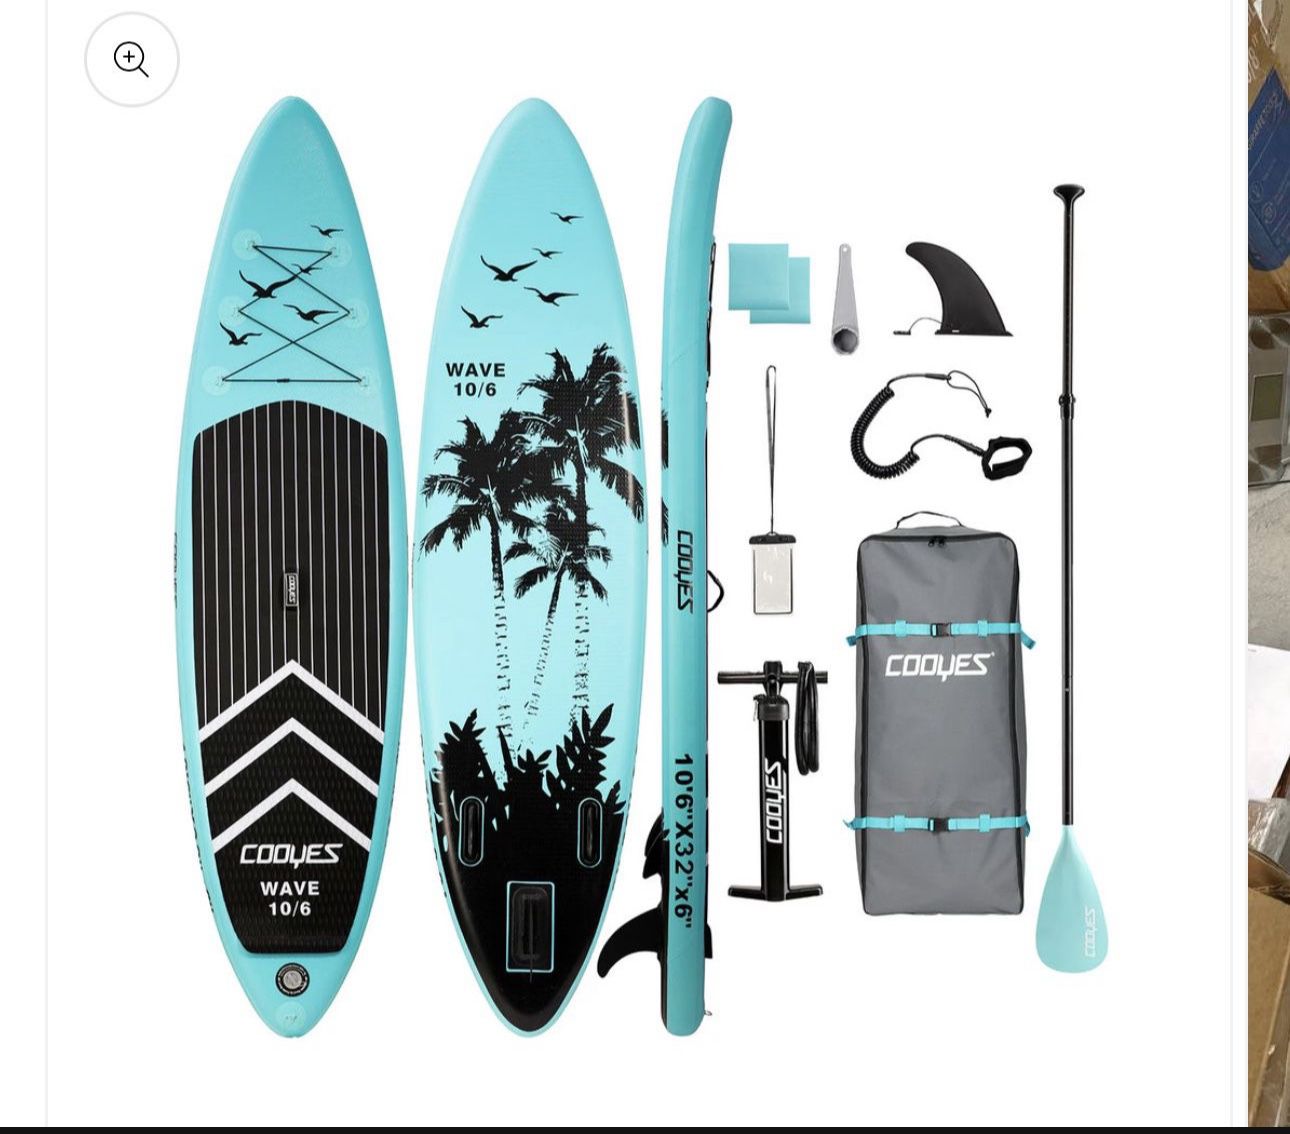 COOYES Inflatable Stand Up Paddle Board 10'6" with Free Premium SUP Accessories & Backpack, Non-Slip Deck. Bonus Waterproof Bag, Leash, Paddle and Han